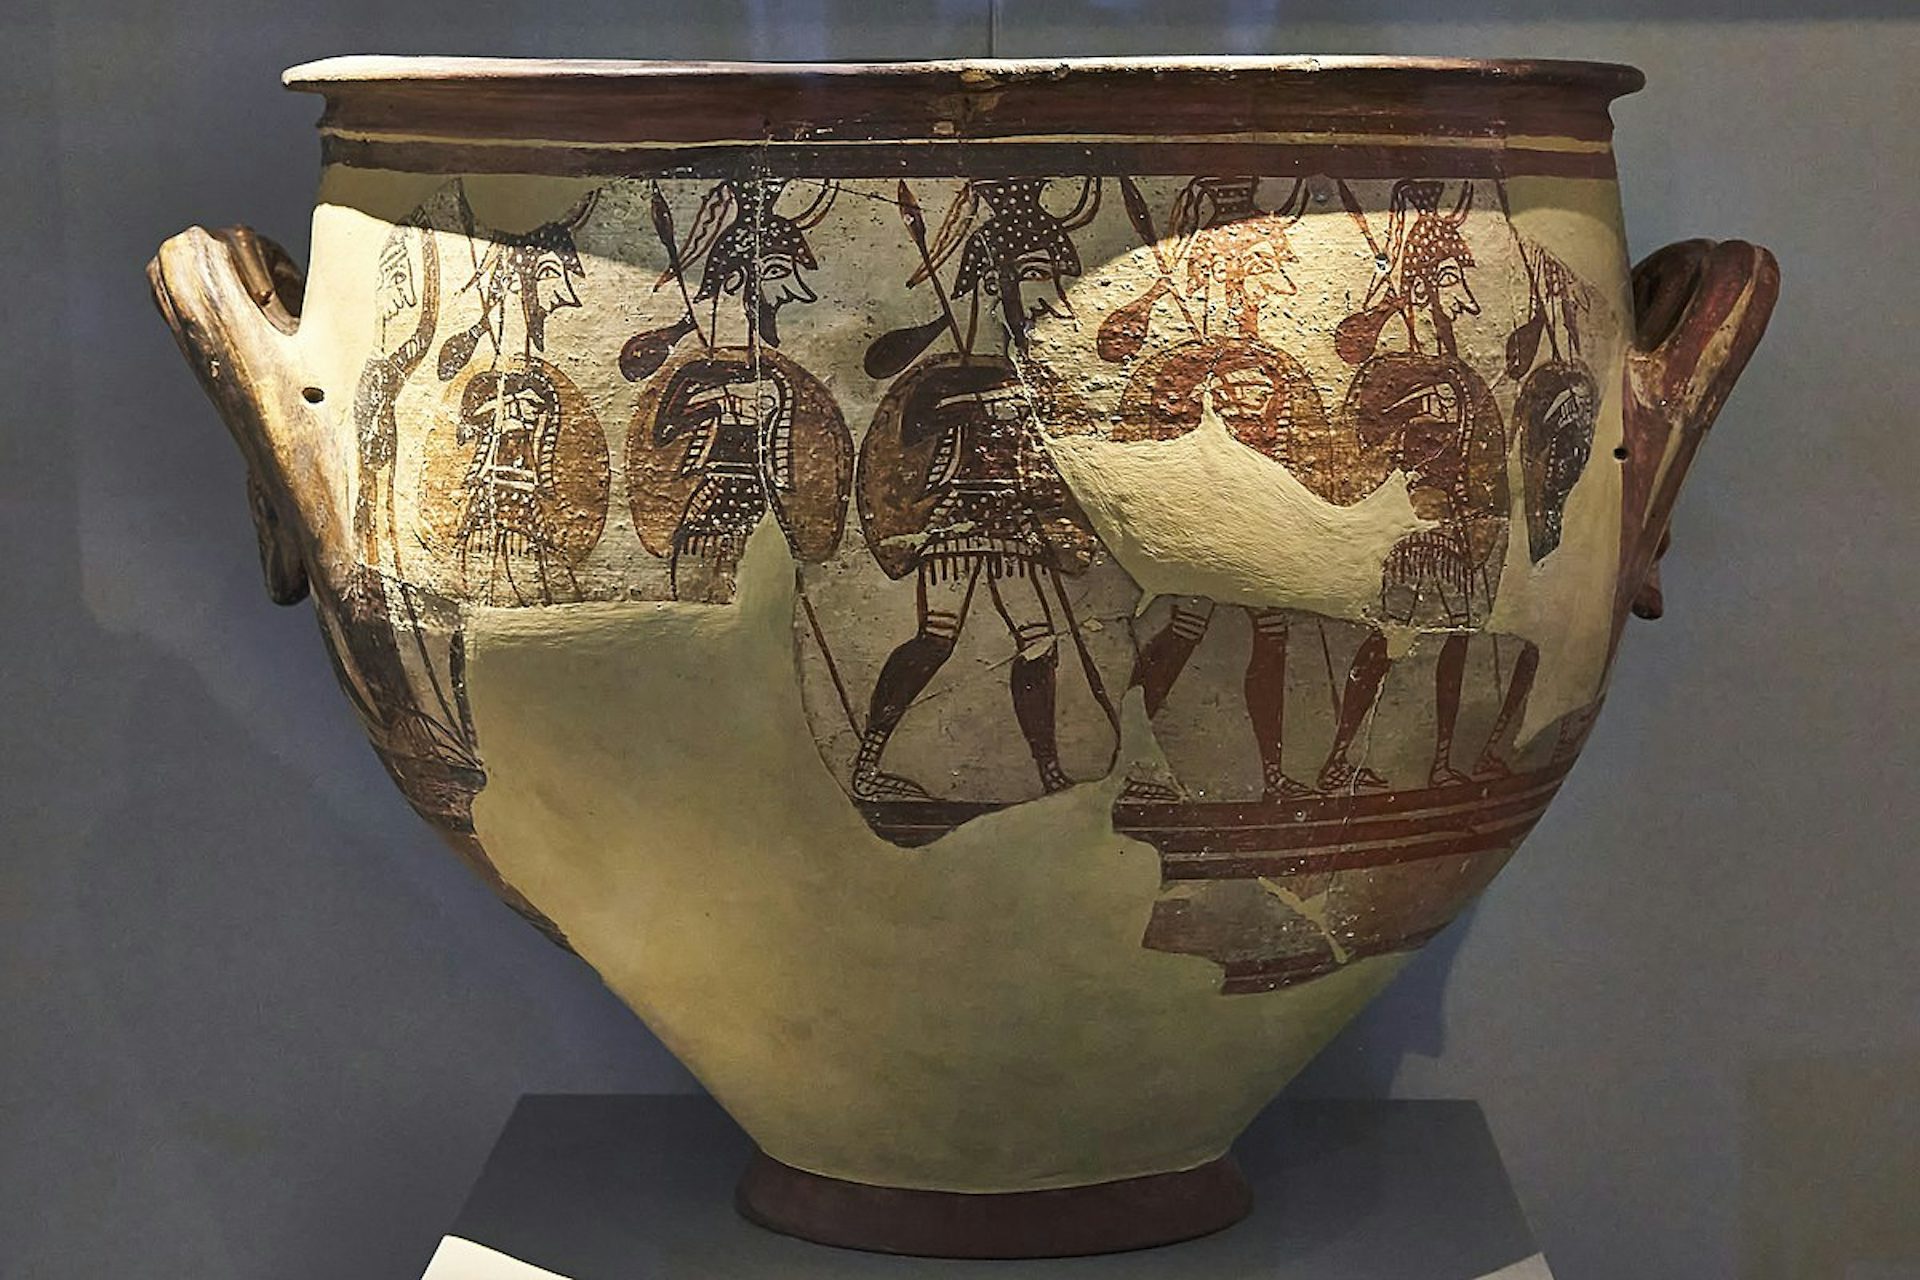 Mycenaean vase painting of soldiers setting out for battle